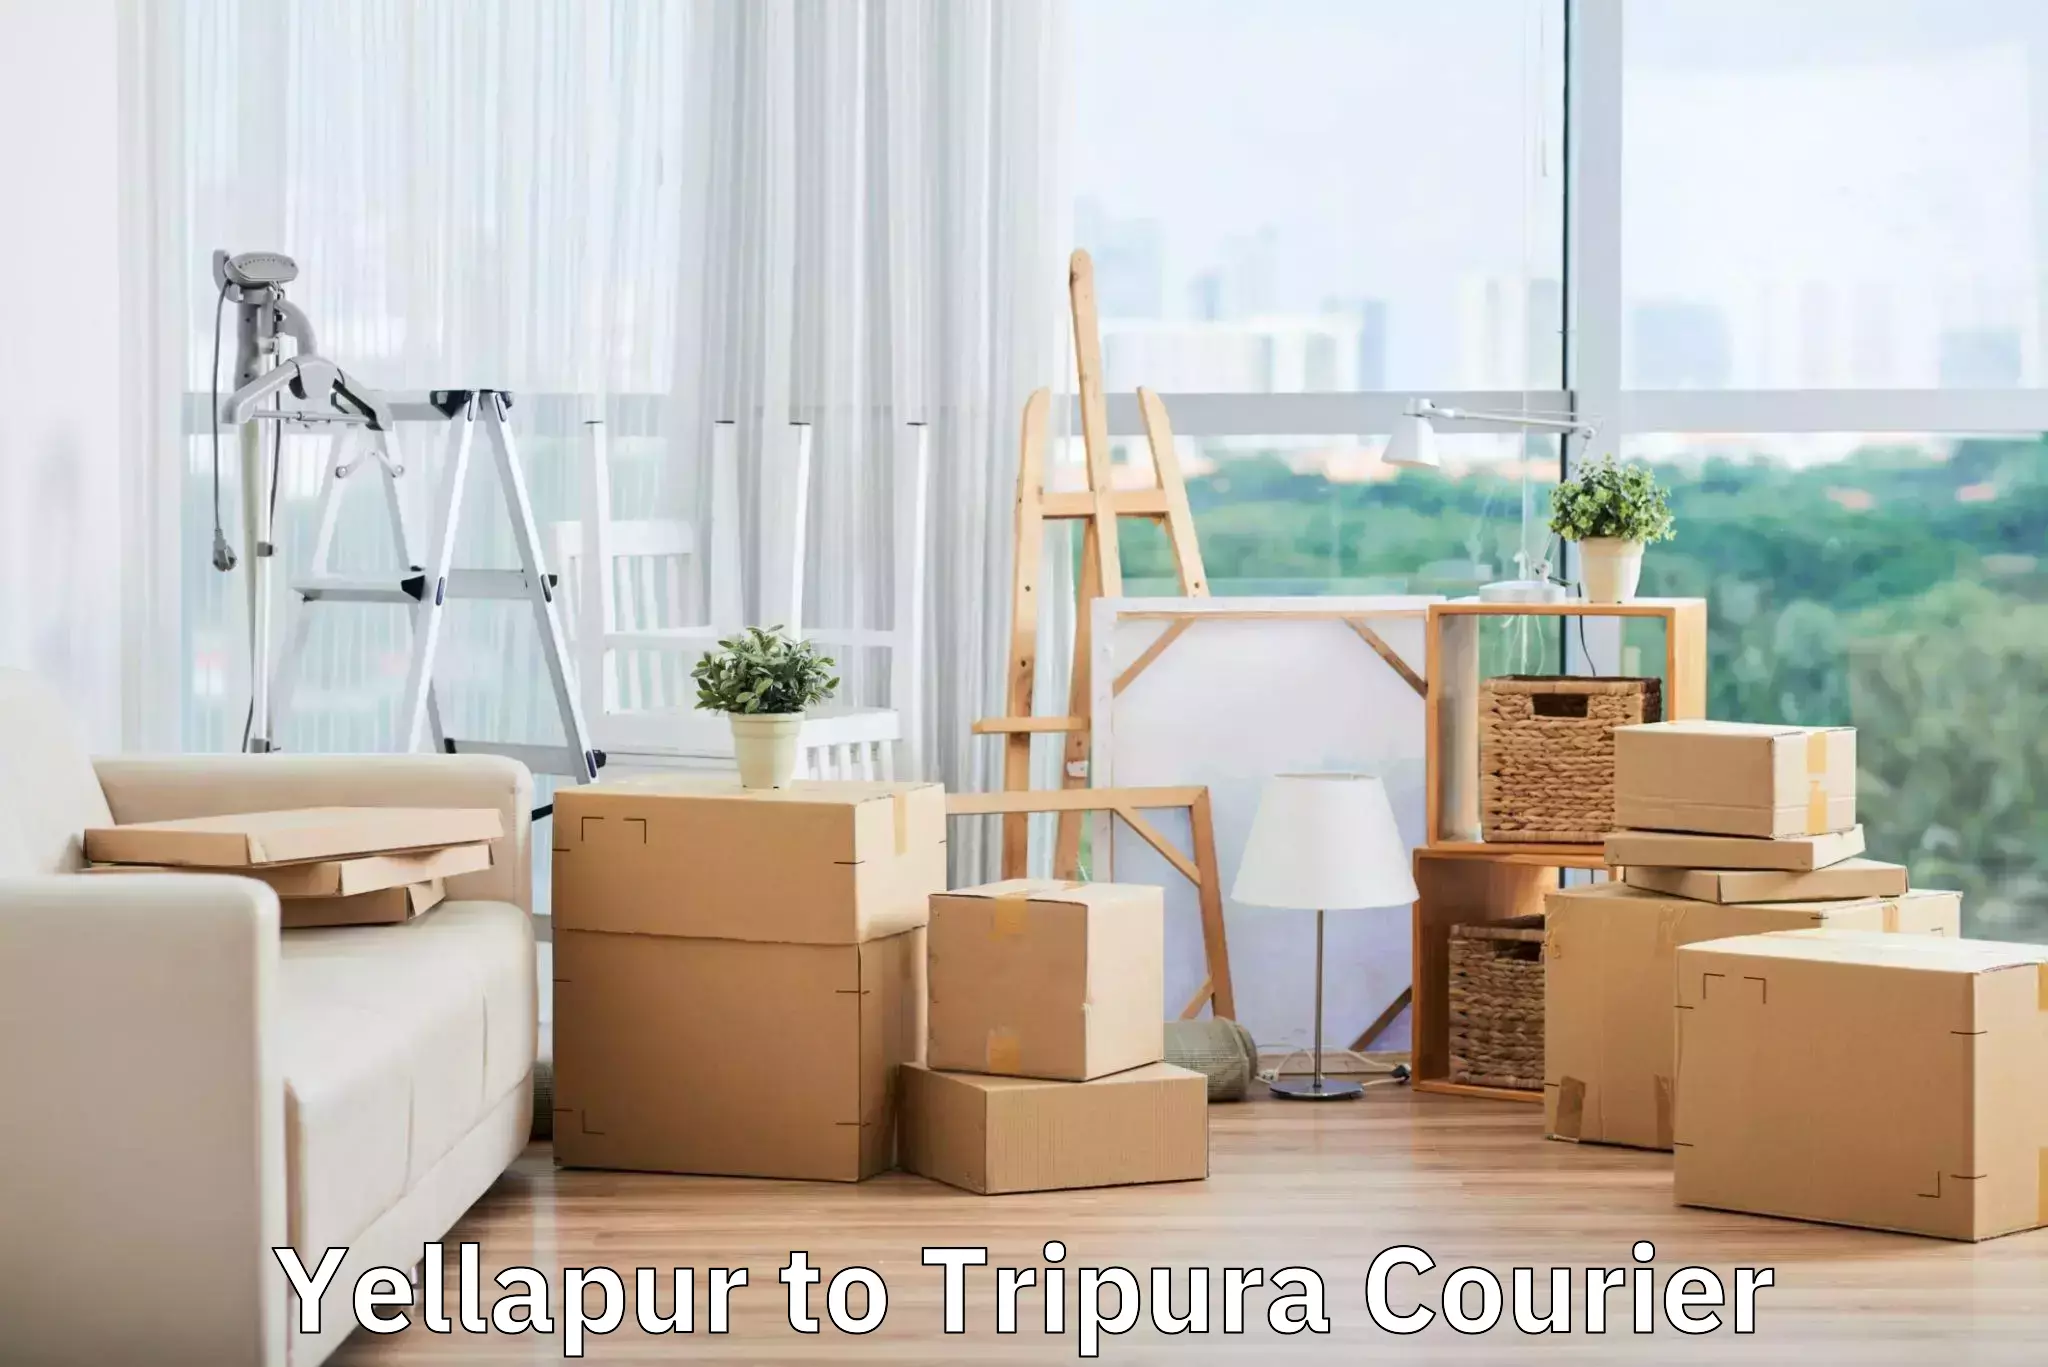 Airport luggage delivery in Yellapur to Tripura